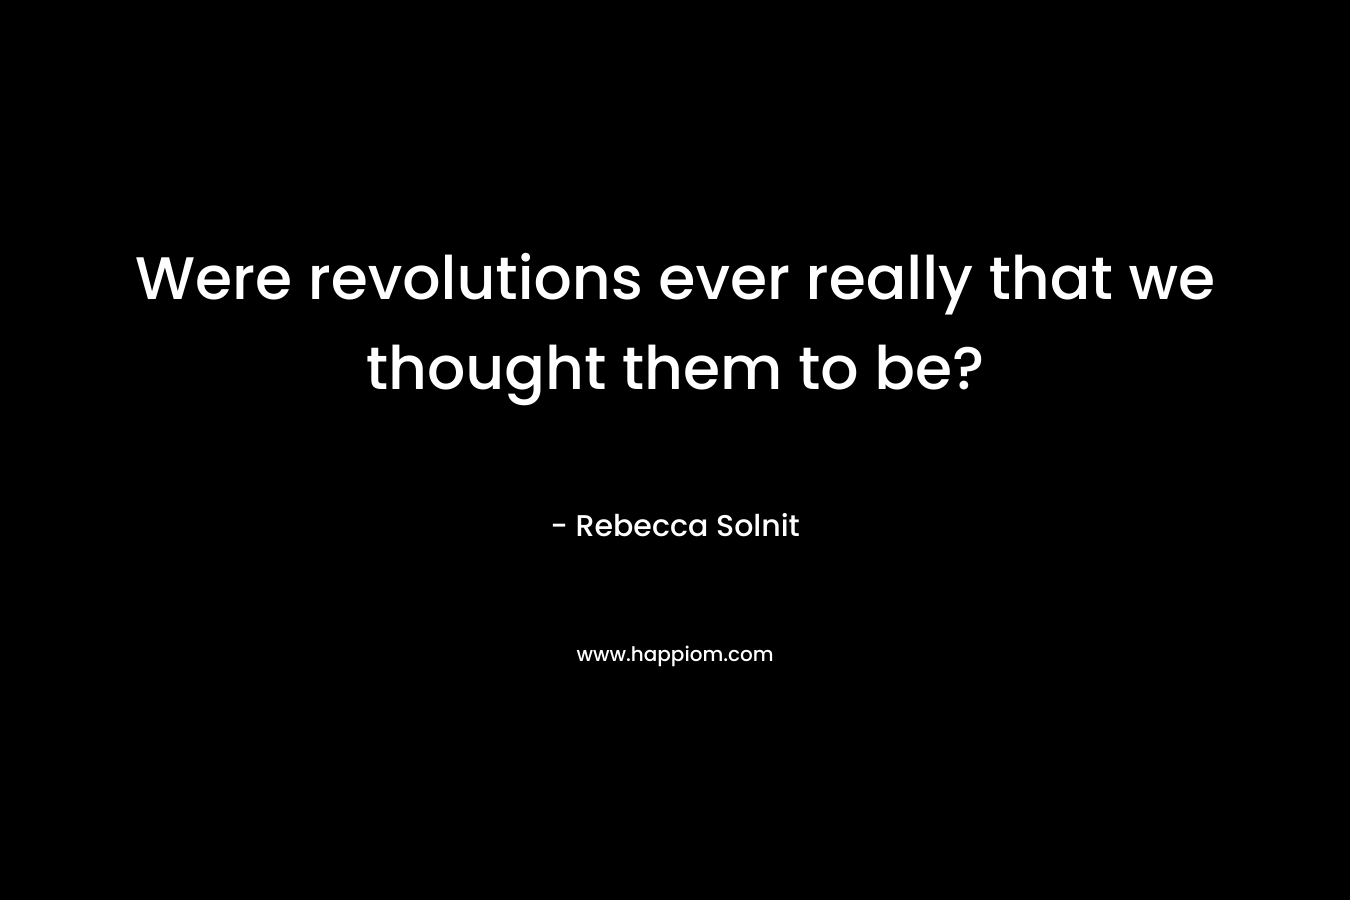 Were revolutions ever really that we thought them to be? – Rebecca Solnit